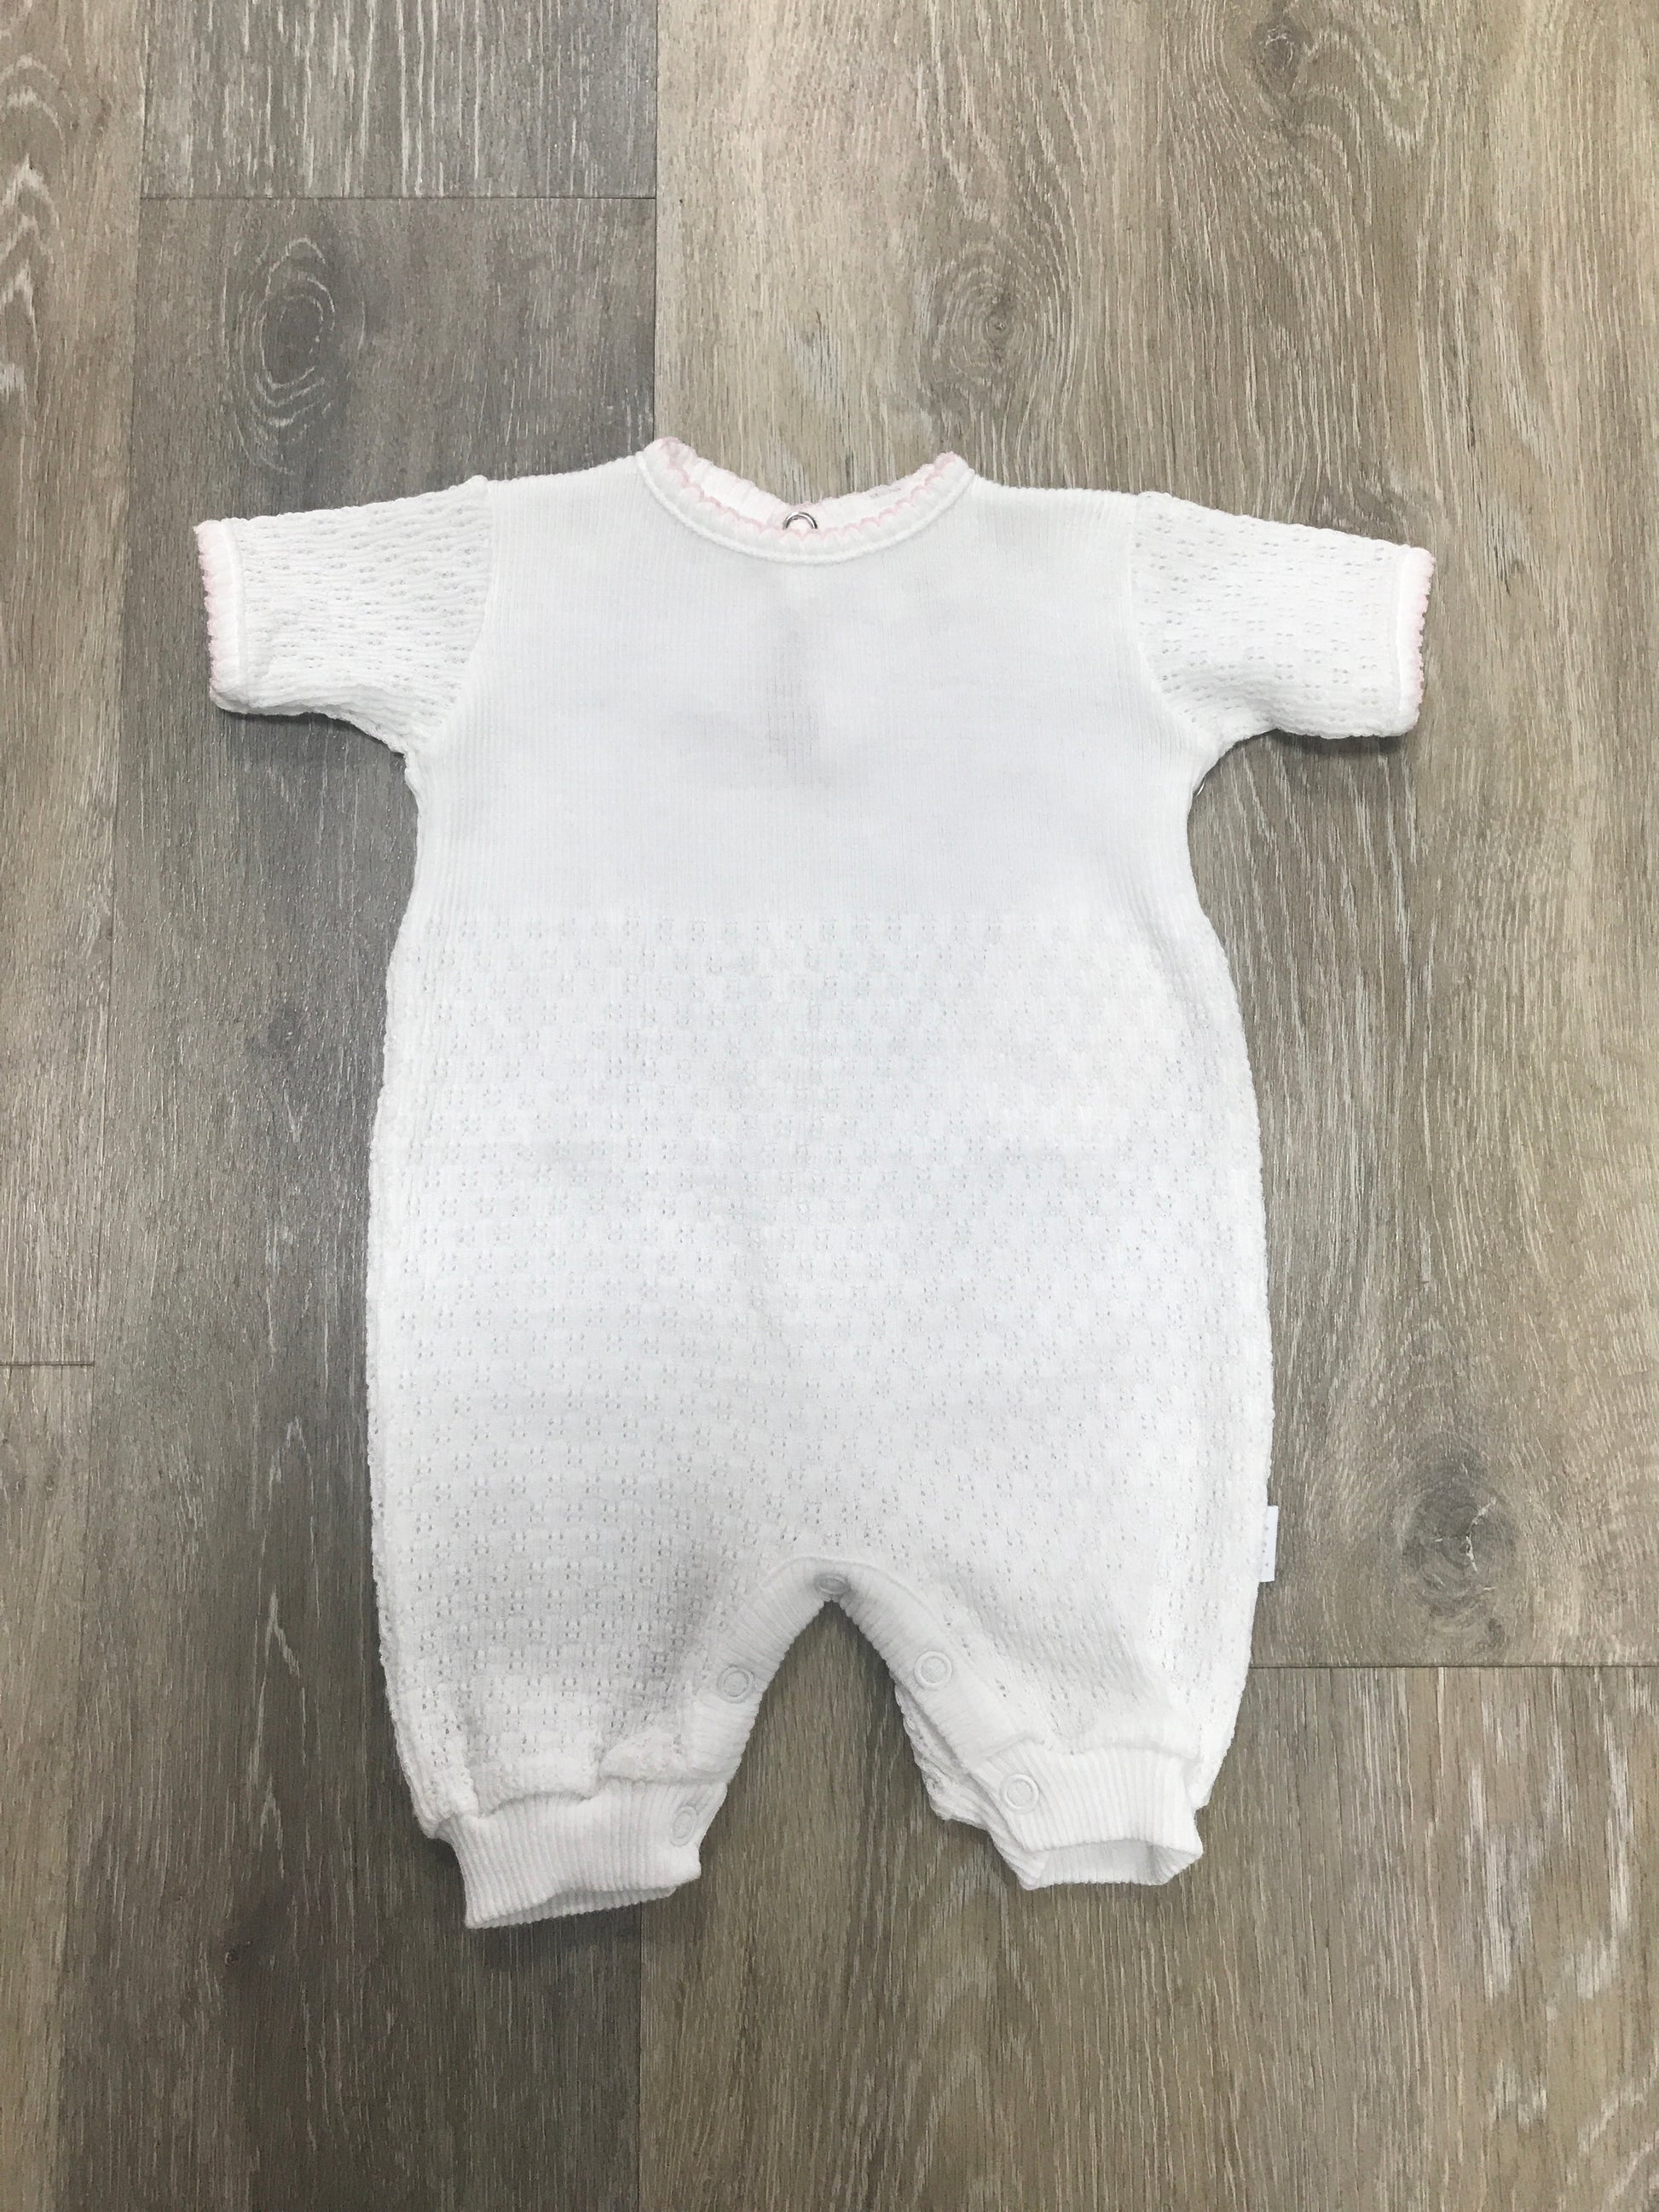 White Short Sleeve Romper with Pink Trim Preemie - Doodlebug's Children's Boutique